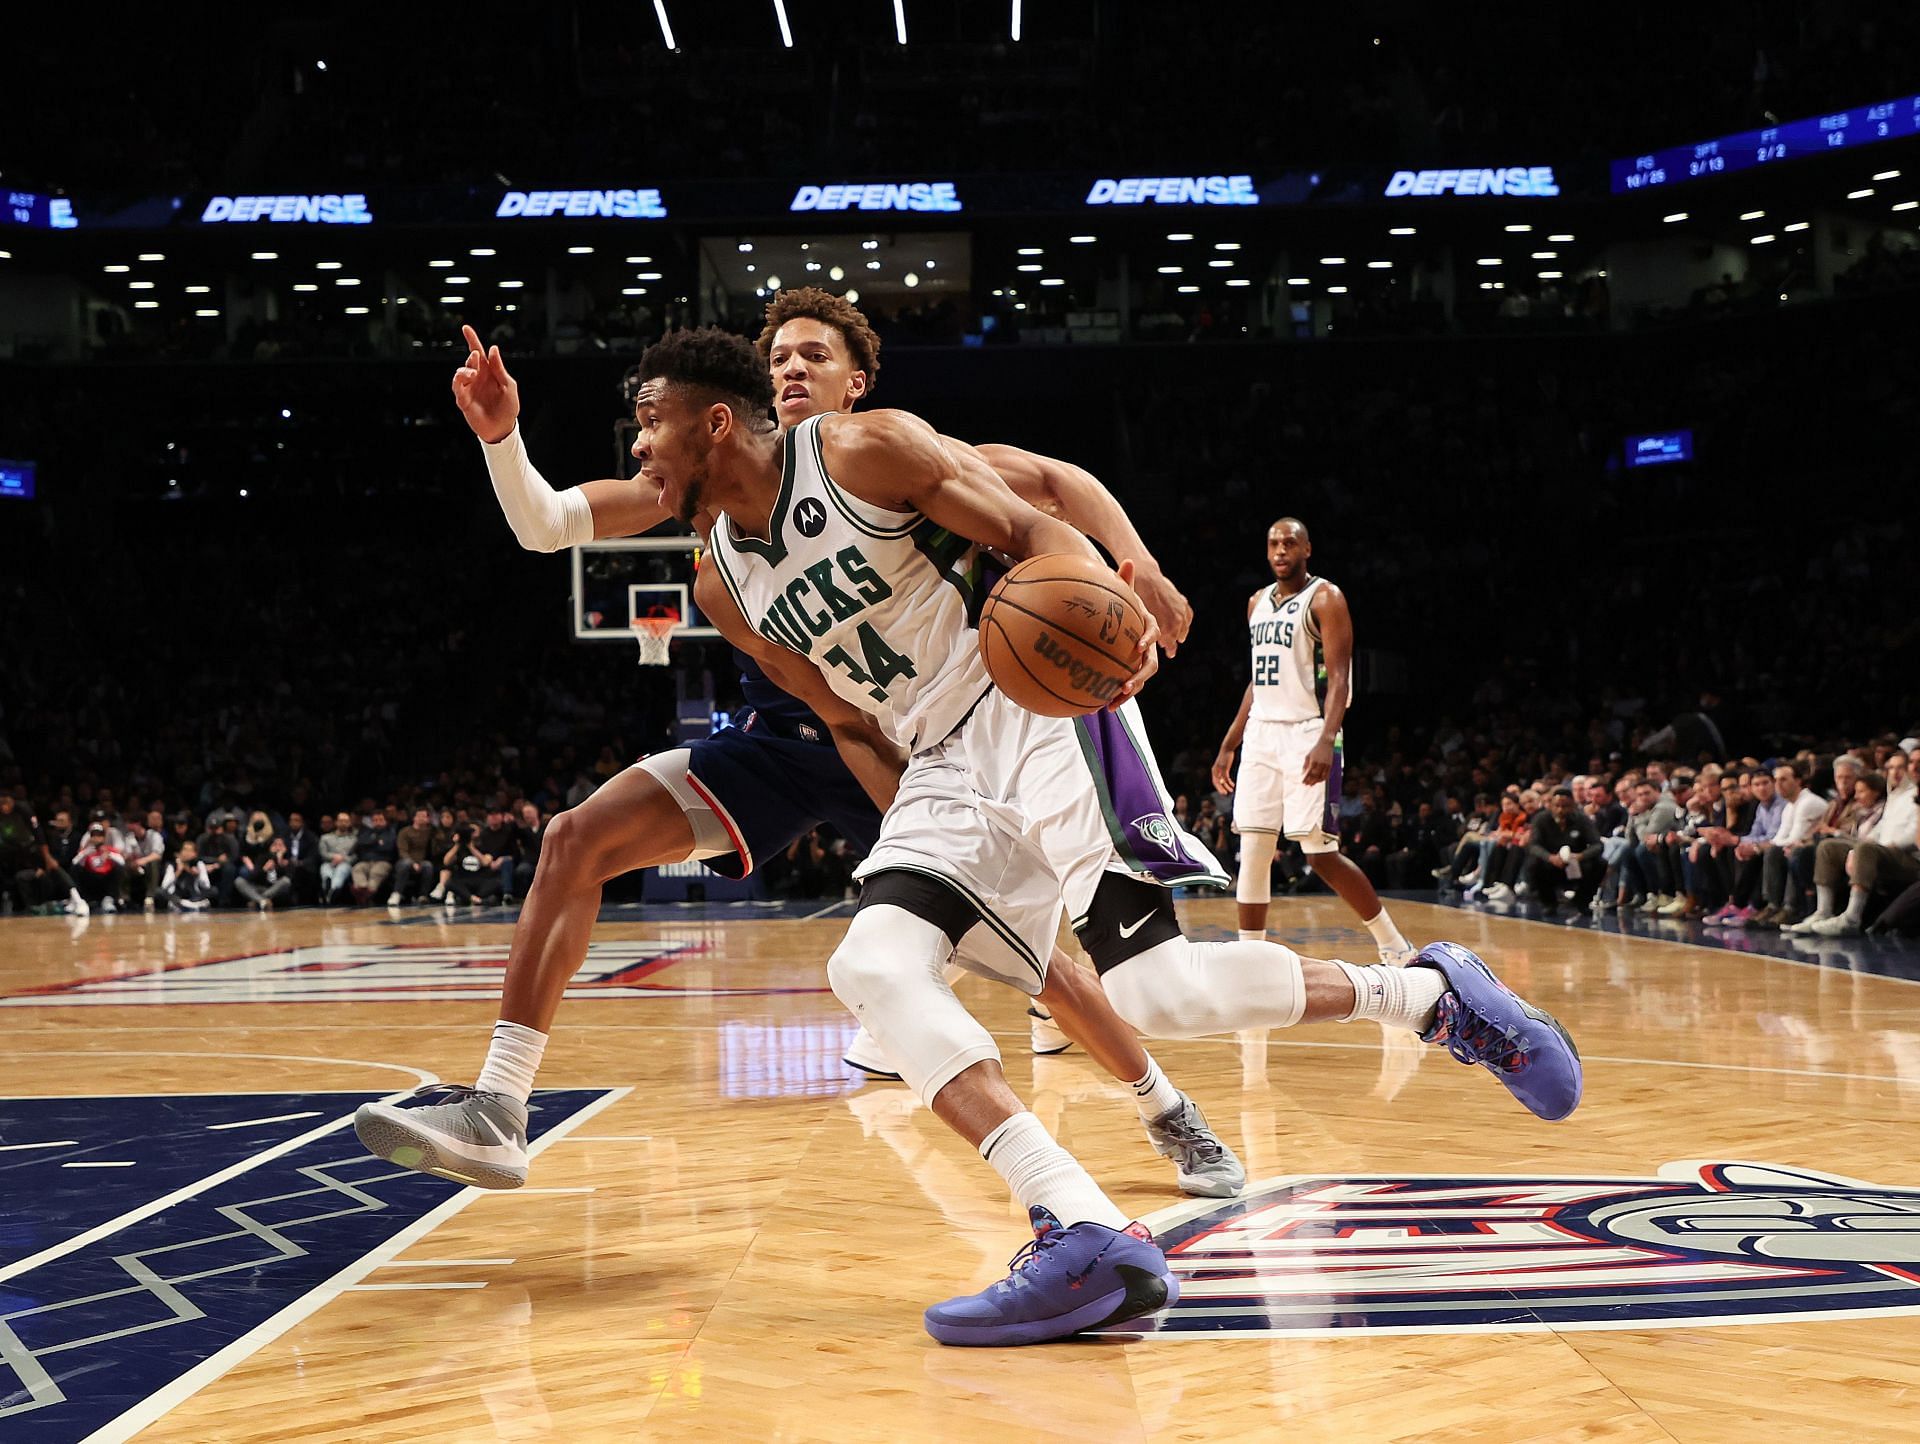 Giannis Antetokounmpo #34 of the Milwaukee Bucks in action against the Brooklyn Nets during their game at Barclays Center on March 31, 2022 in New York City.